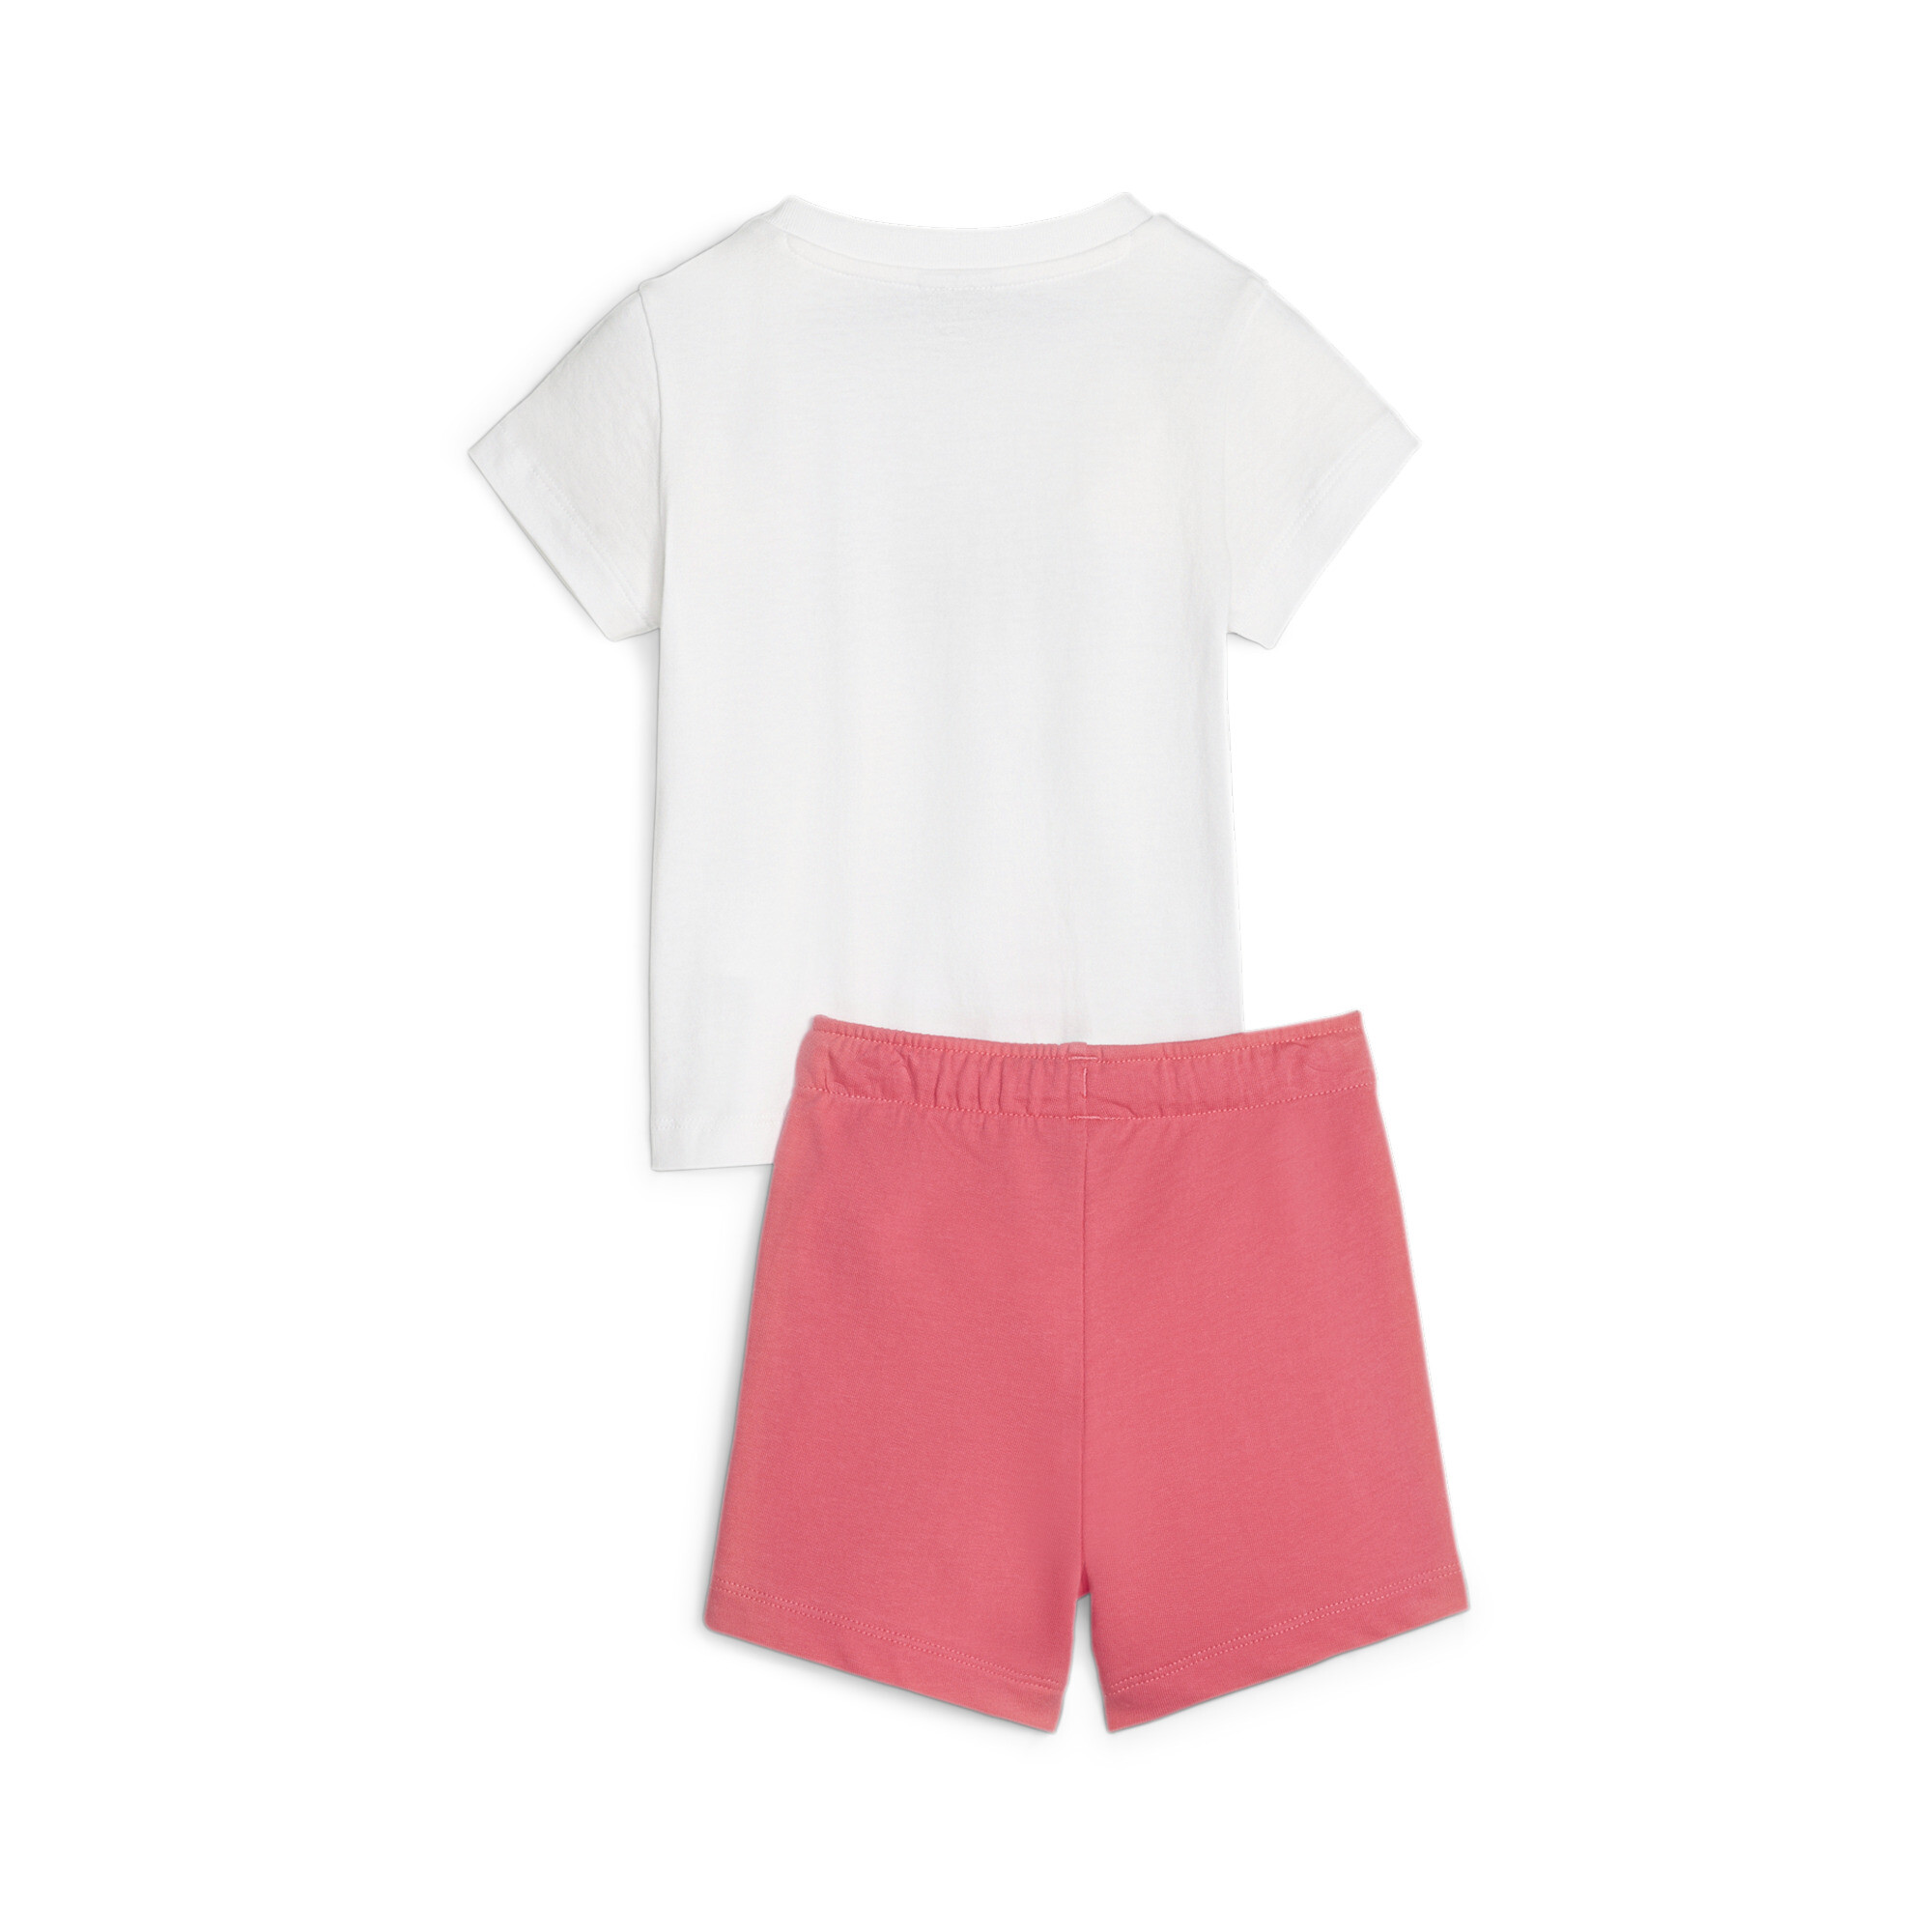 PUMA Minicats T-Shirt And Shorts Babies' Set In Pink, Size 12-18 Months